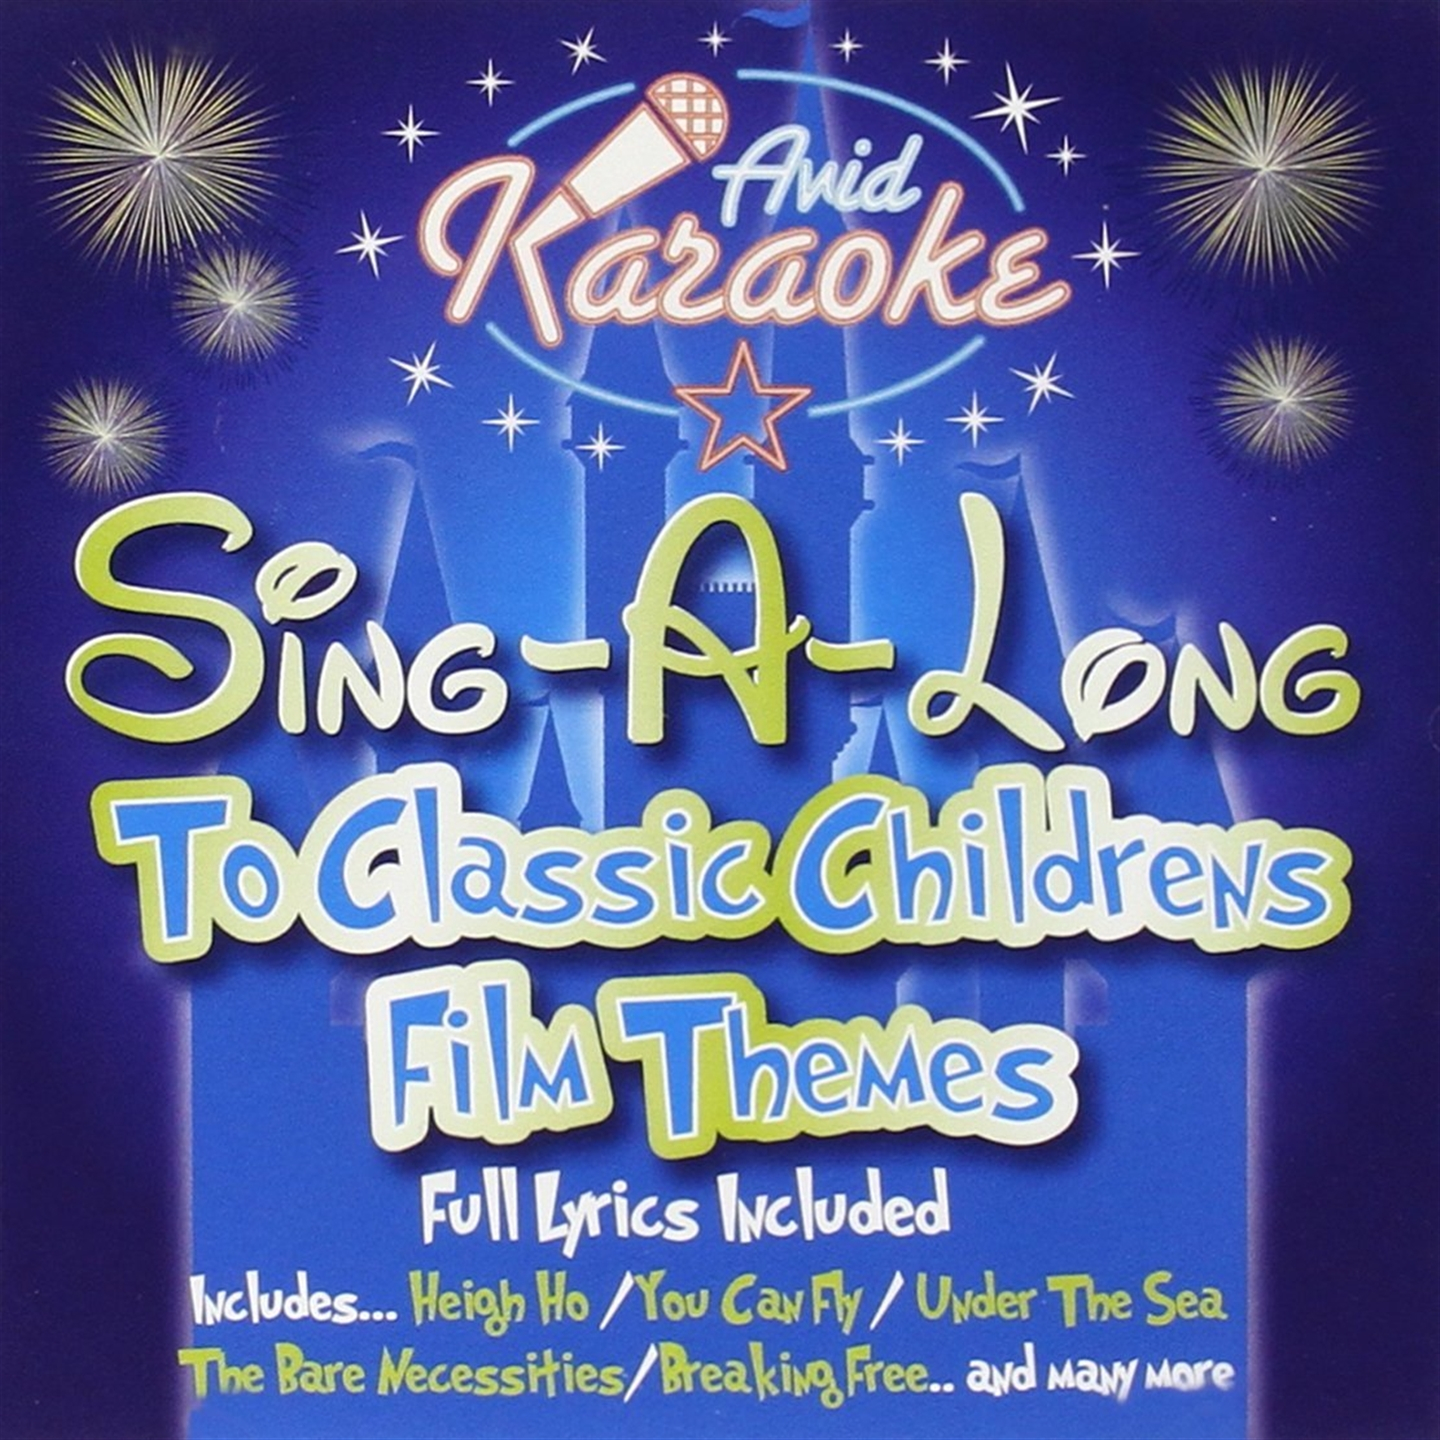 SING-A-LONG TO CLASSIC CHILDREN